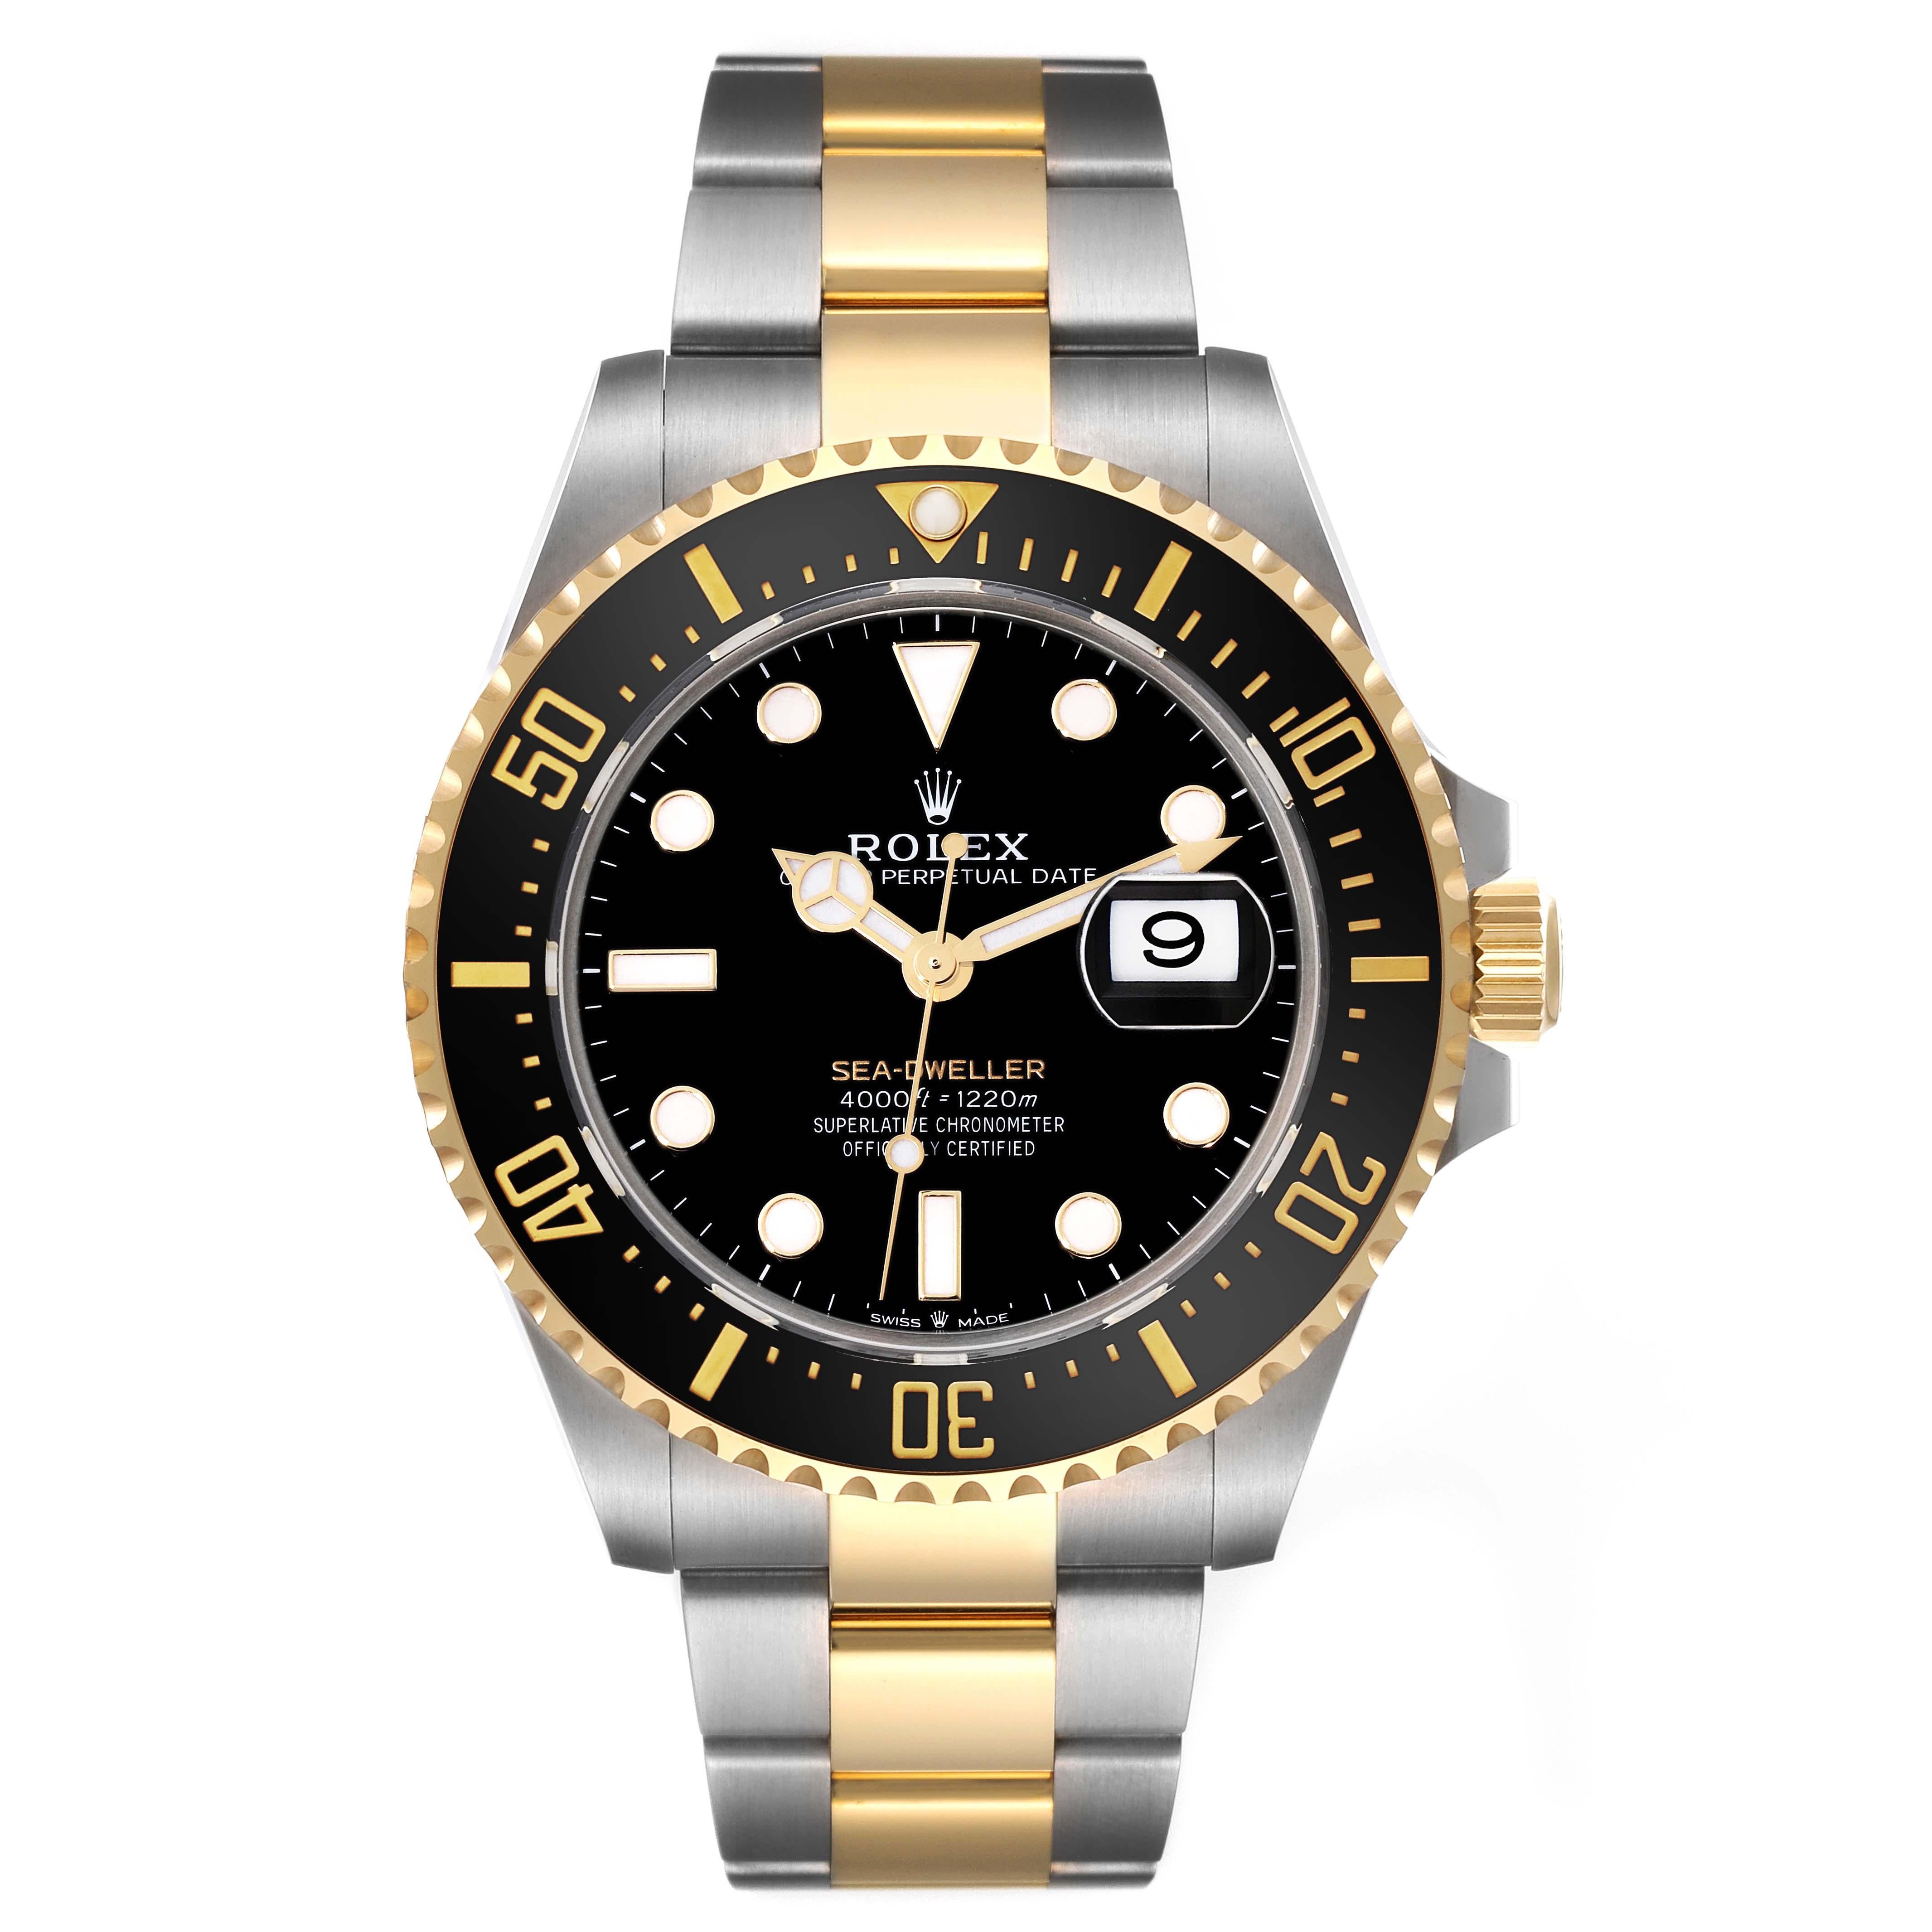 Rolex Seadweller Black Dial Steel Yellow Gold Mens Watch 126603 Box Card. Officially certified chronometer automatic self-winding movement. Stainless steel and 18K yellow gold oyster case 43 mm in diameter. Rolex logo on the crown. Special